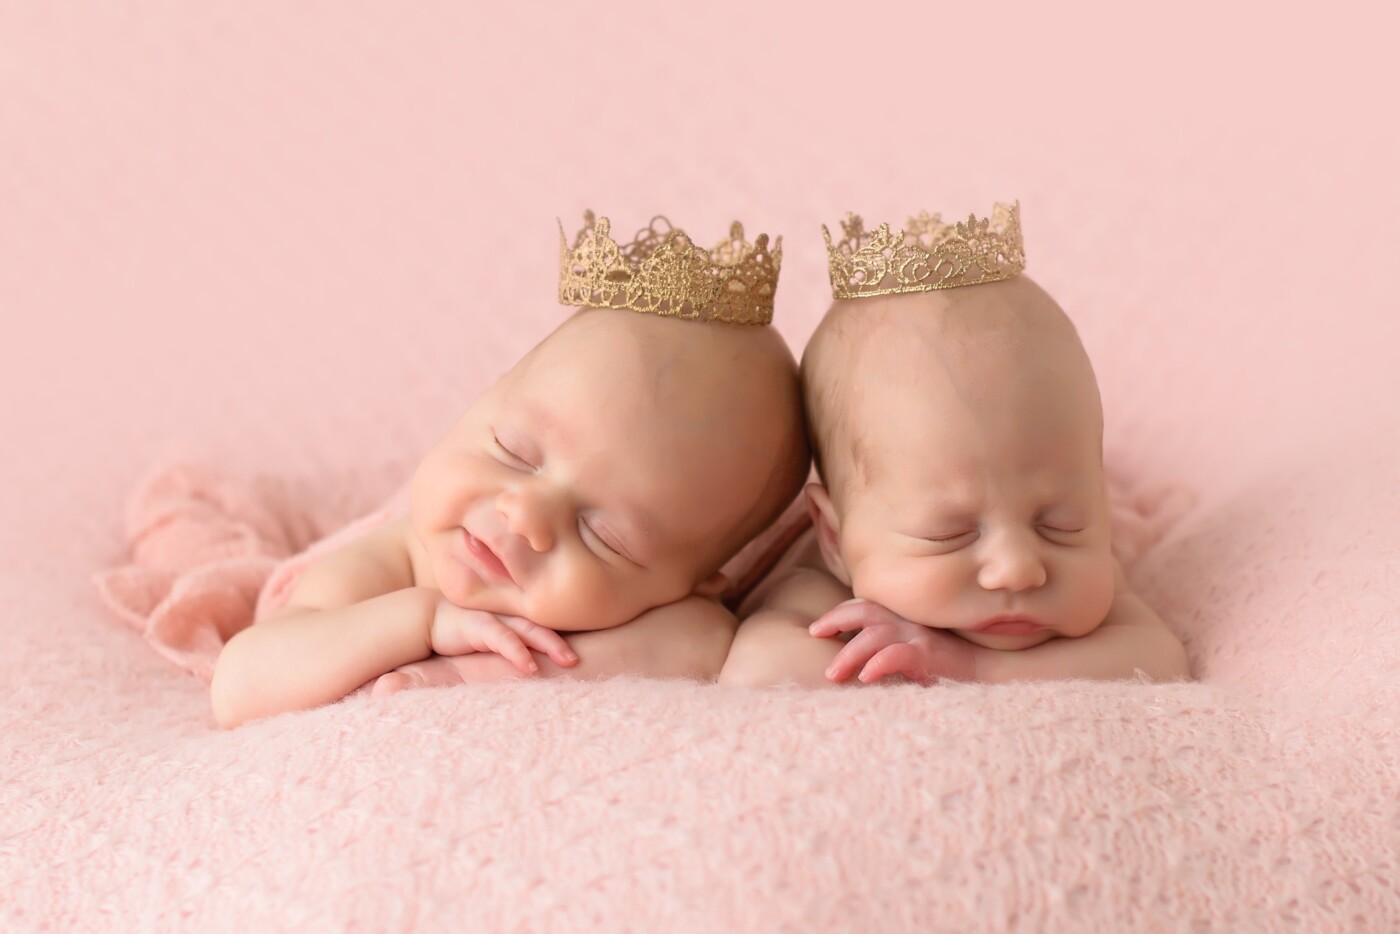 I was so much looking forward to meeting these precious little girls.<br />
Flo & Nel arrived 8 weeks too early and they have come a long way since then.<br />
It was a great pleasure capturing these pictures that will last a lifetime.<br />
